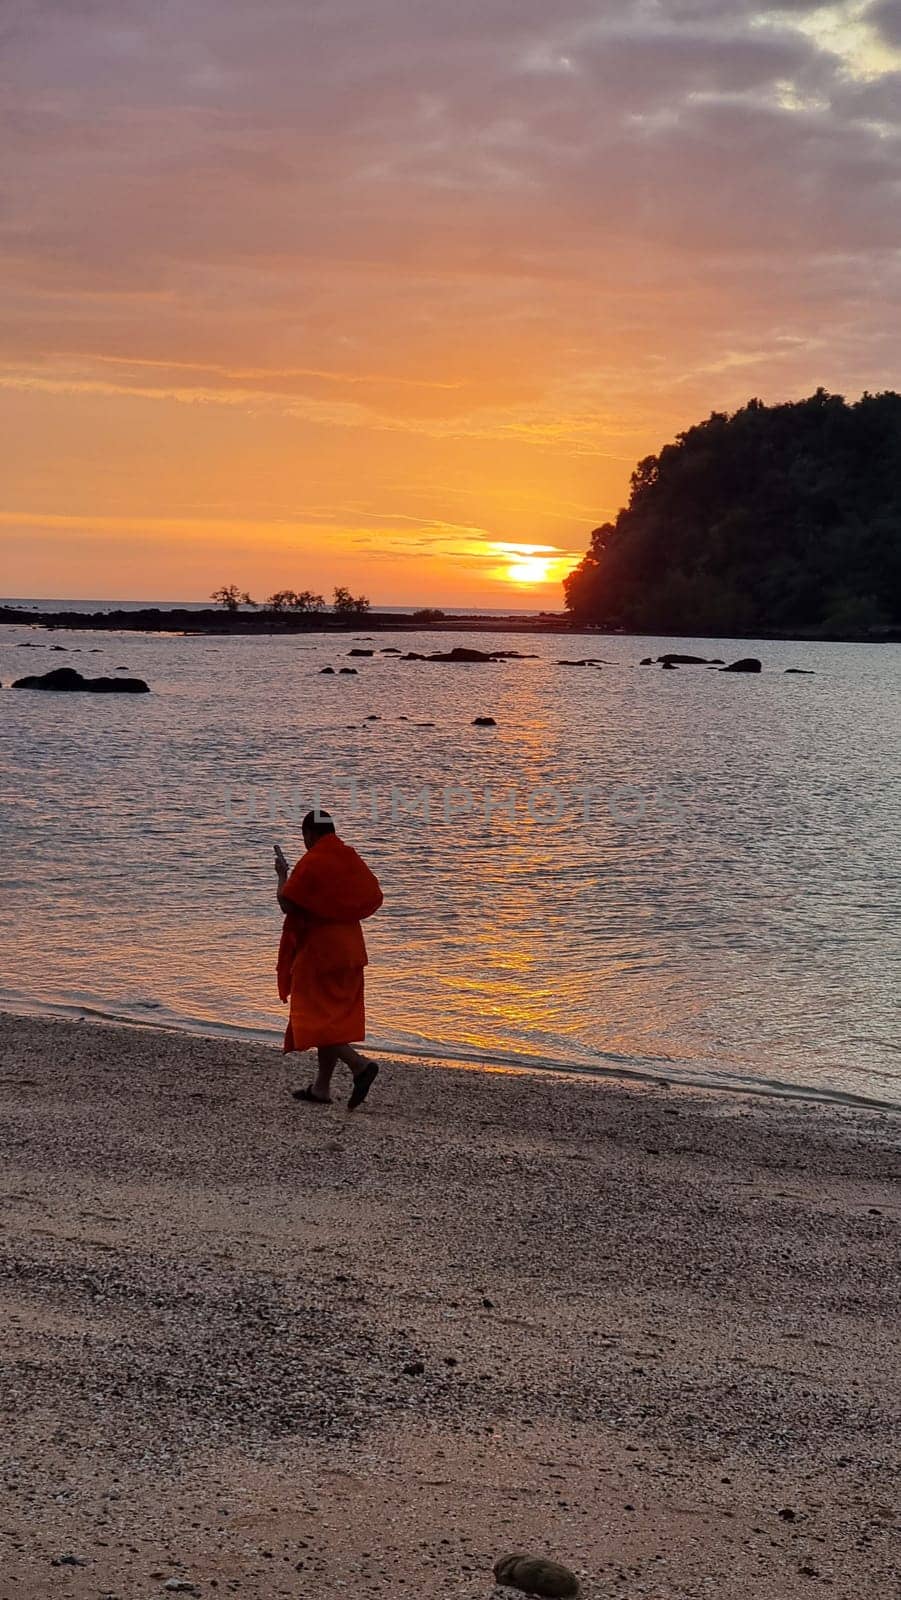 A lone Thai monk figure strolls along the sandy beach as the sun sets, creating a mesmerizing silhouette against the colorful sky. Koh Libong Thailand